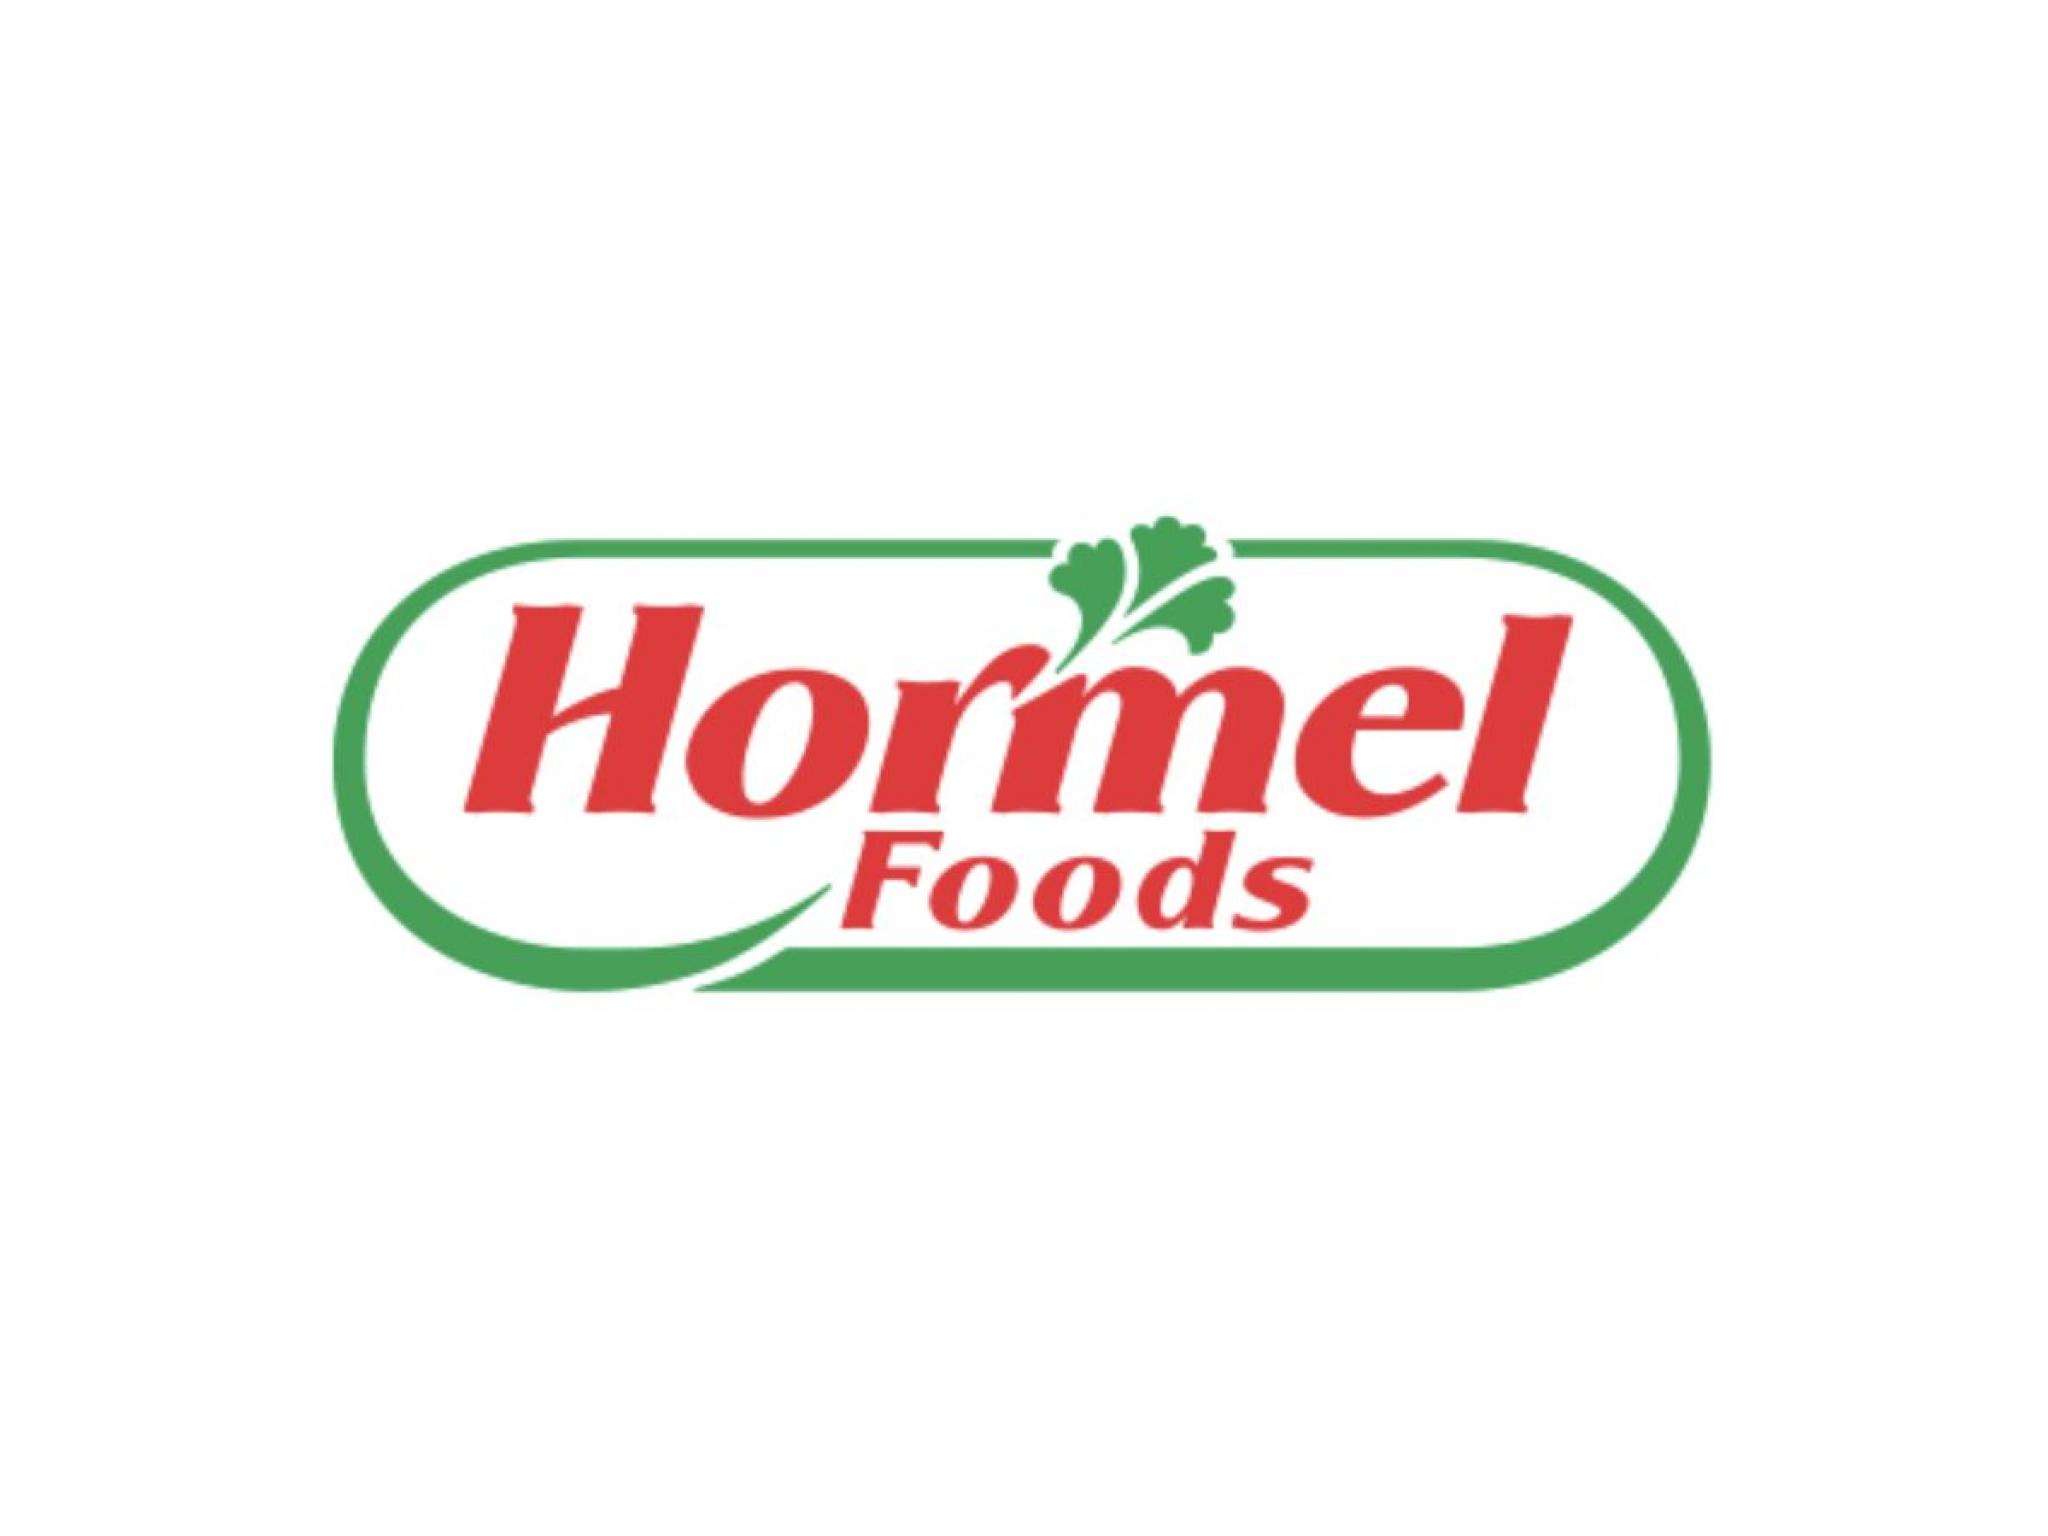  dow-jumps-over-100-points-hormel-foods-earnings-miss-estimates 